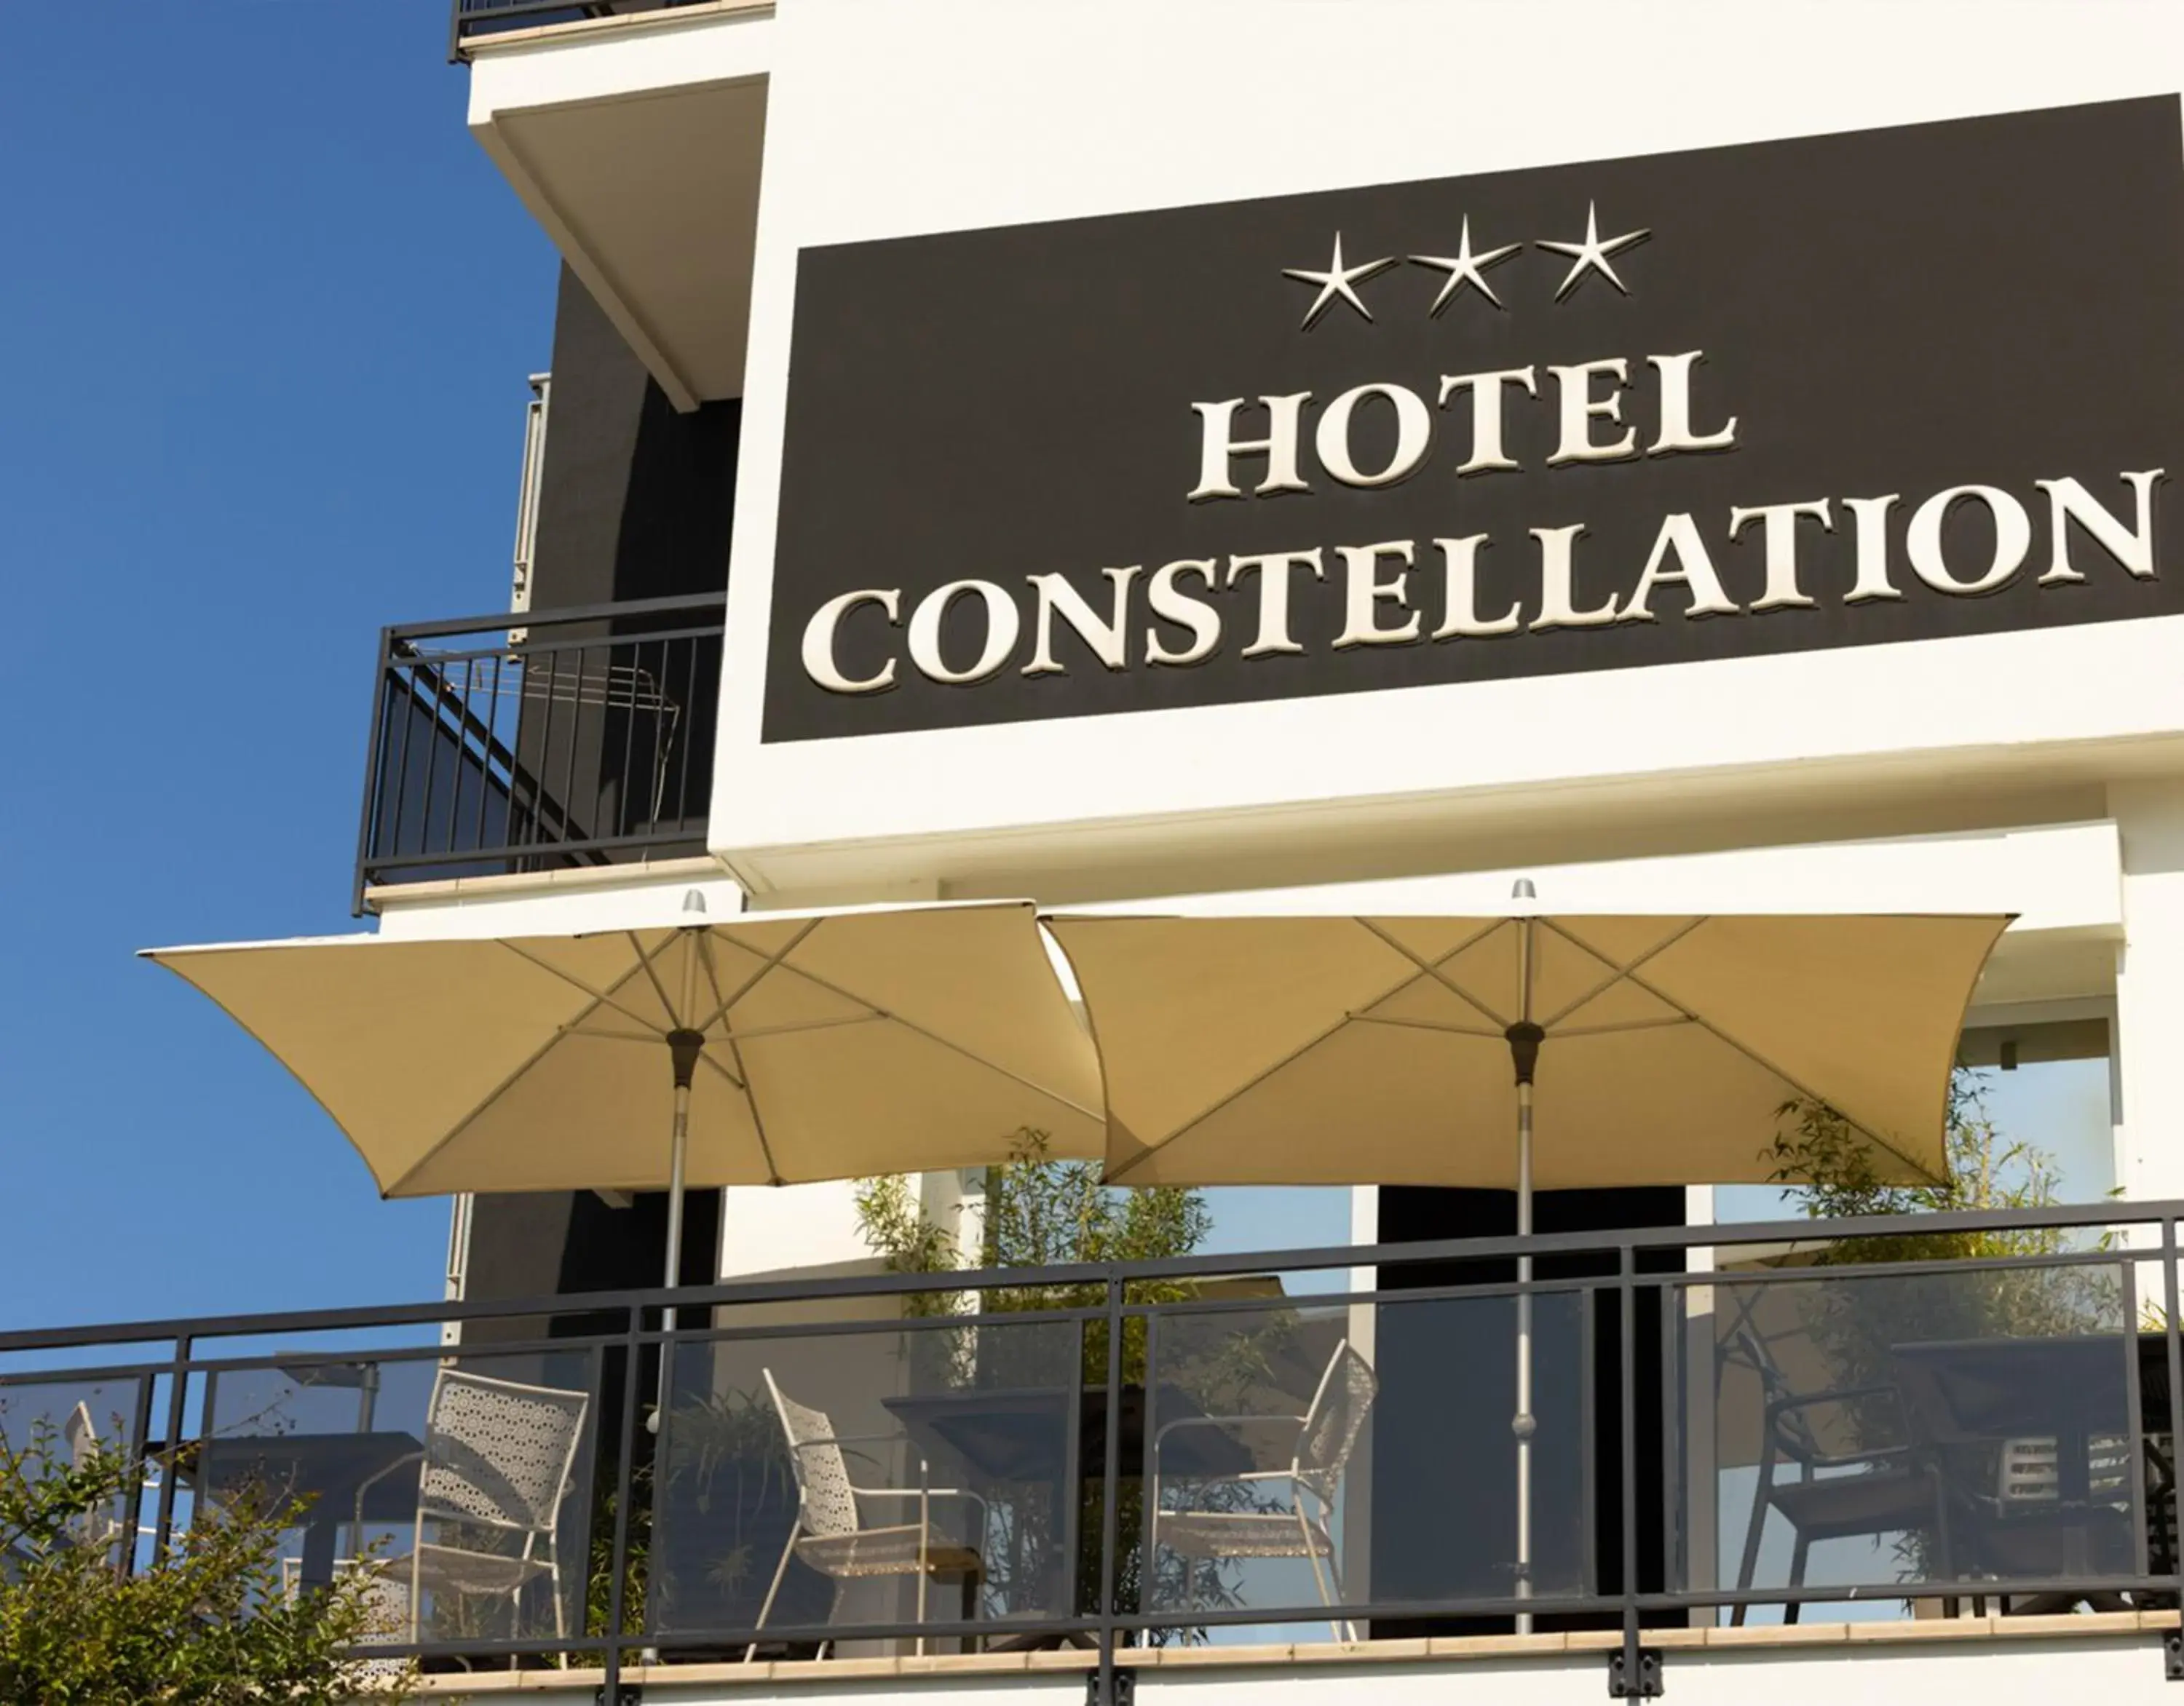 Property building in Hotel Constellation